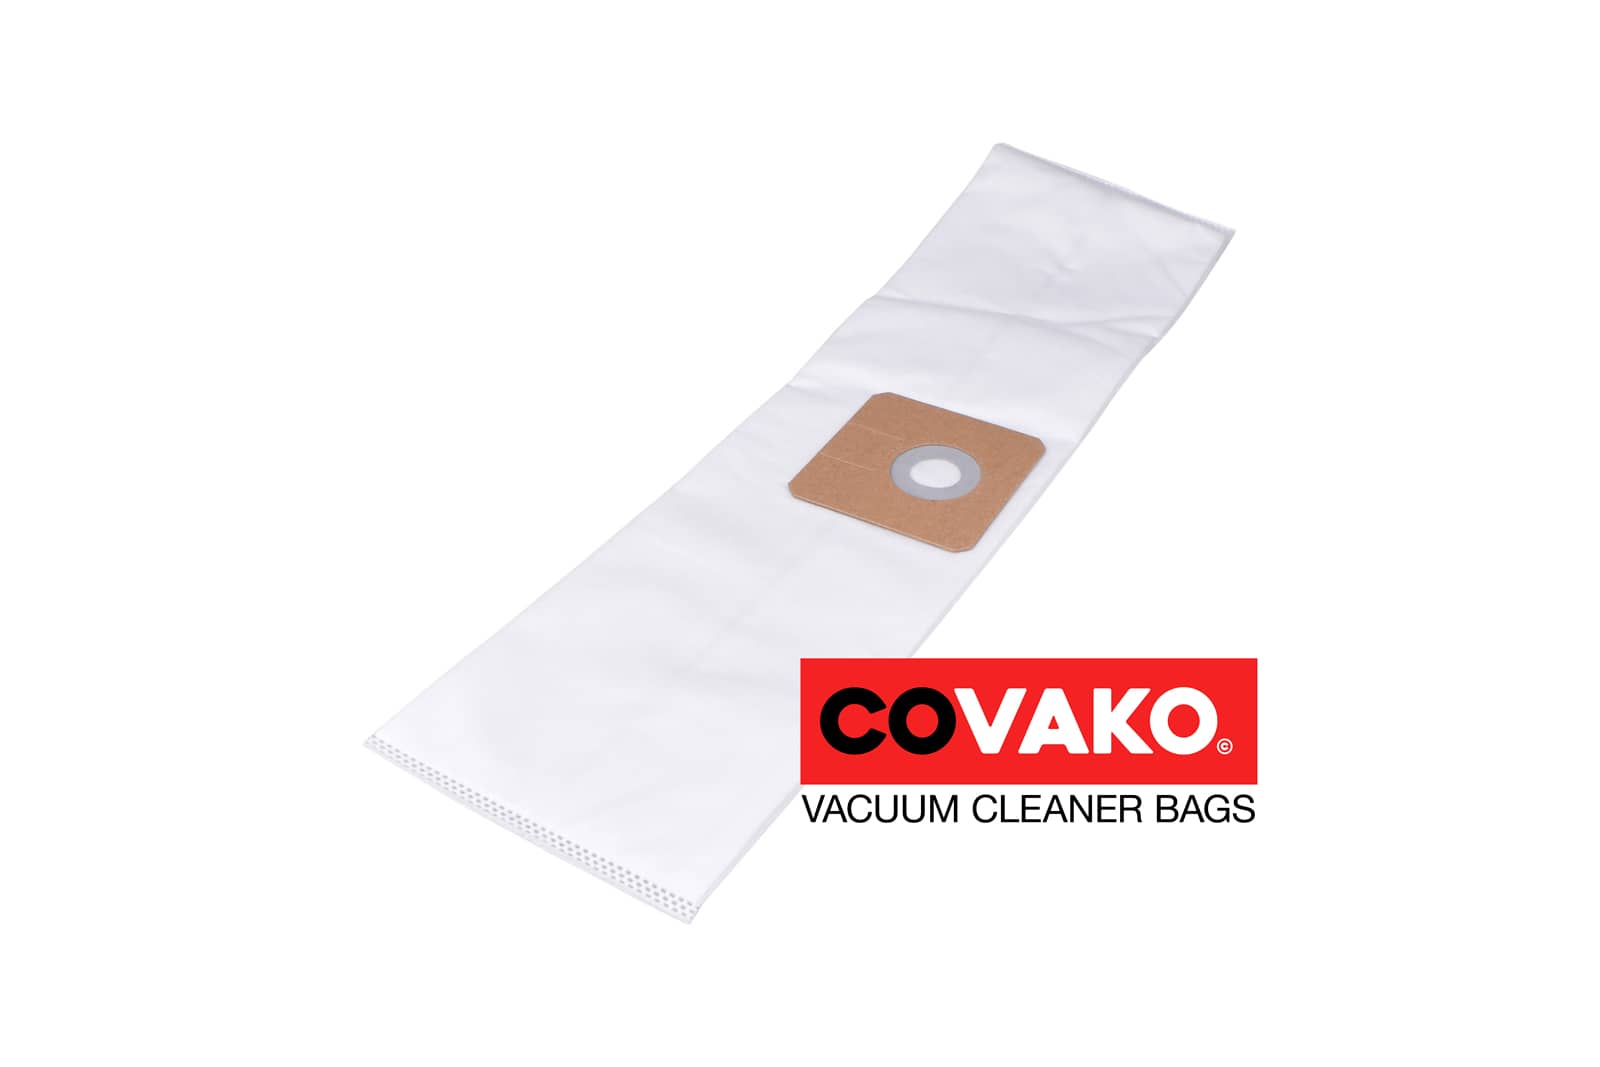 TMB Piccolo New Plus / Synthesis - TMB vacuum cleaner bags